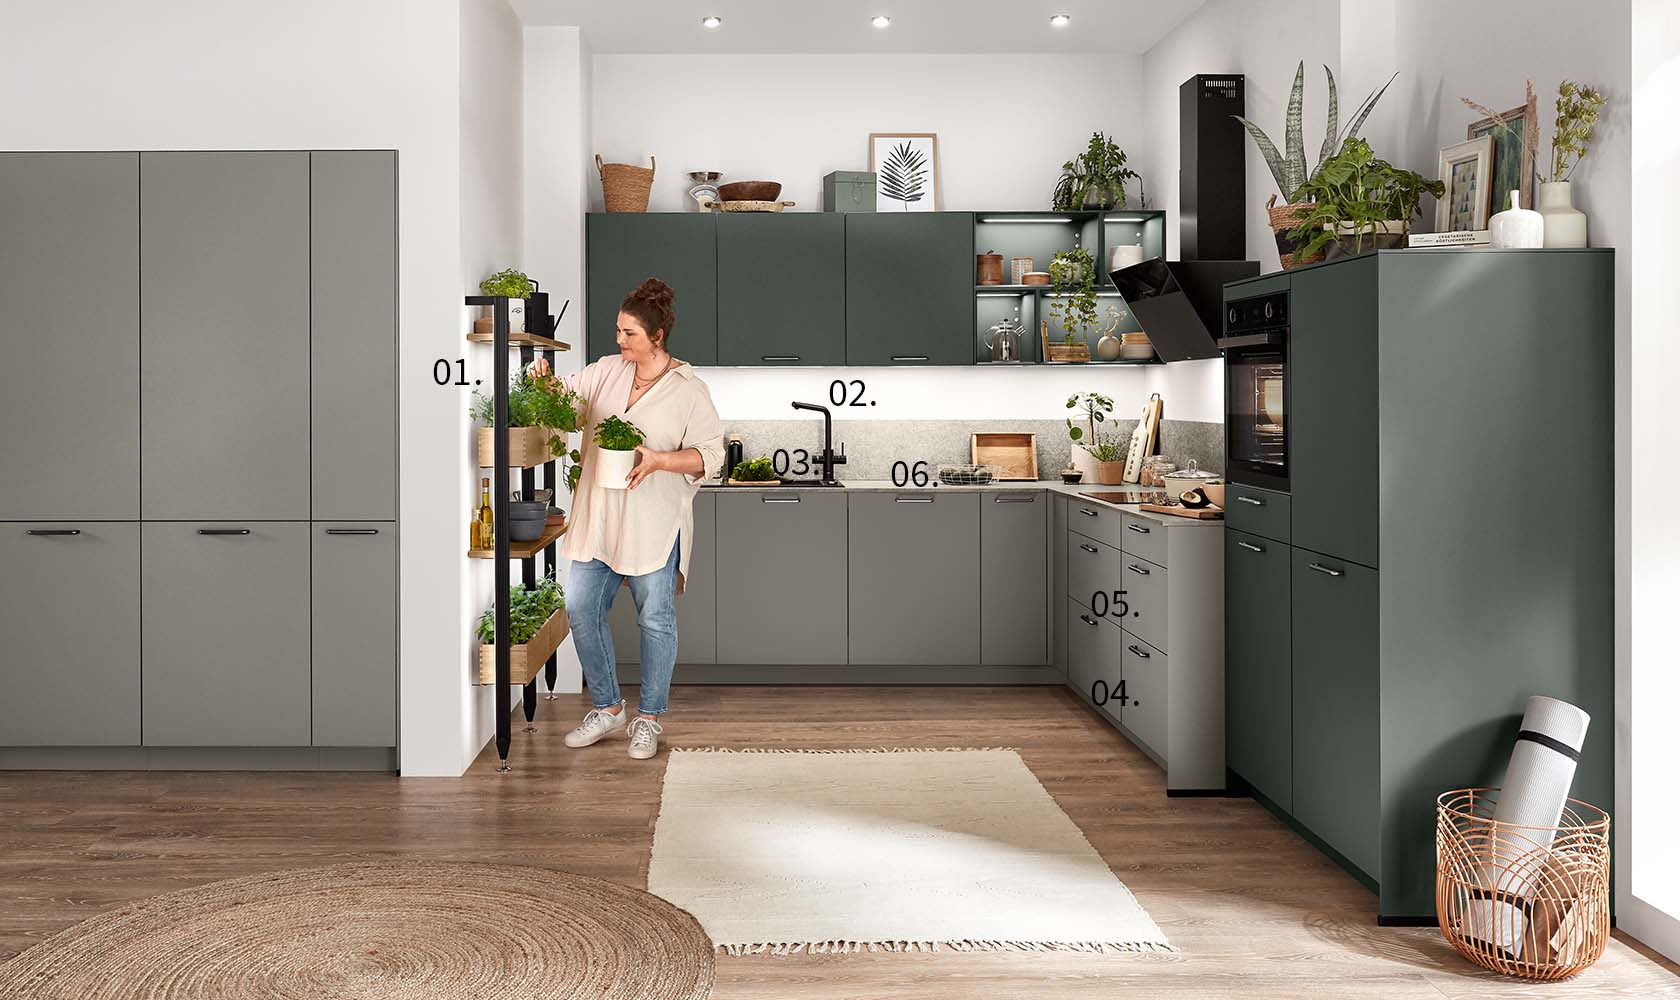 A woman stands in a modern kitchen with numbered pointers highlighting features such as cabinetry, appliances, and decorative plants.